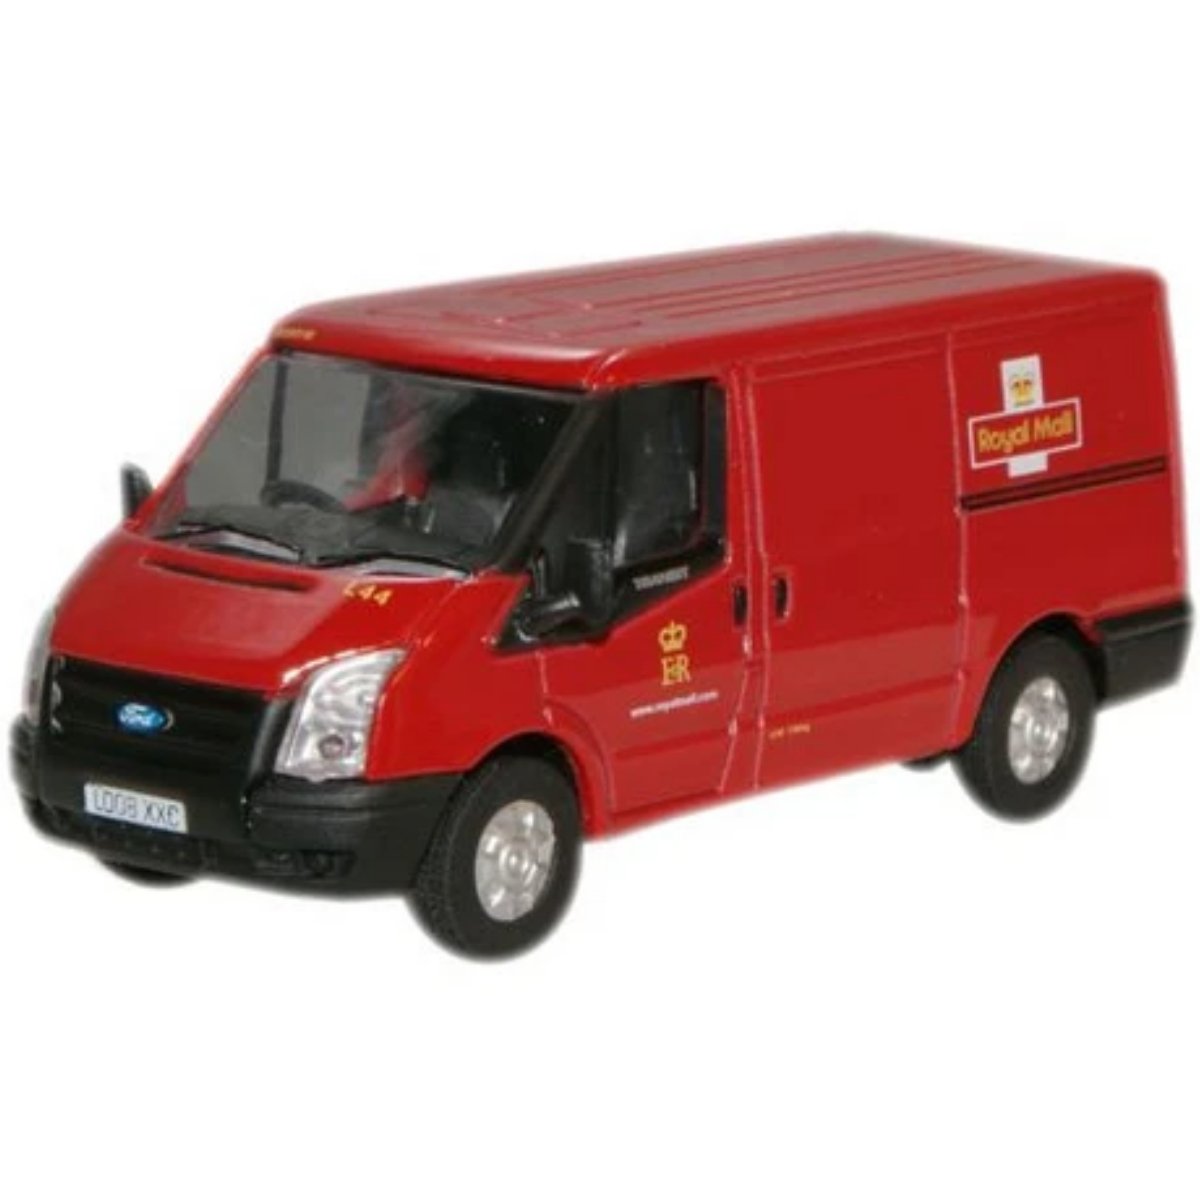 Oxford Diecast 76FT002 Royal Mail New Ford Transit Van (L.Roof) - Phillips Hobbies